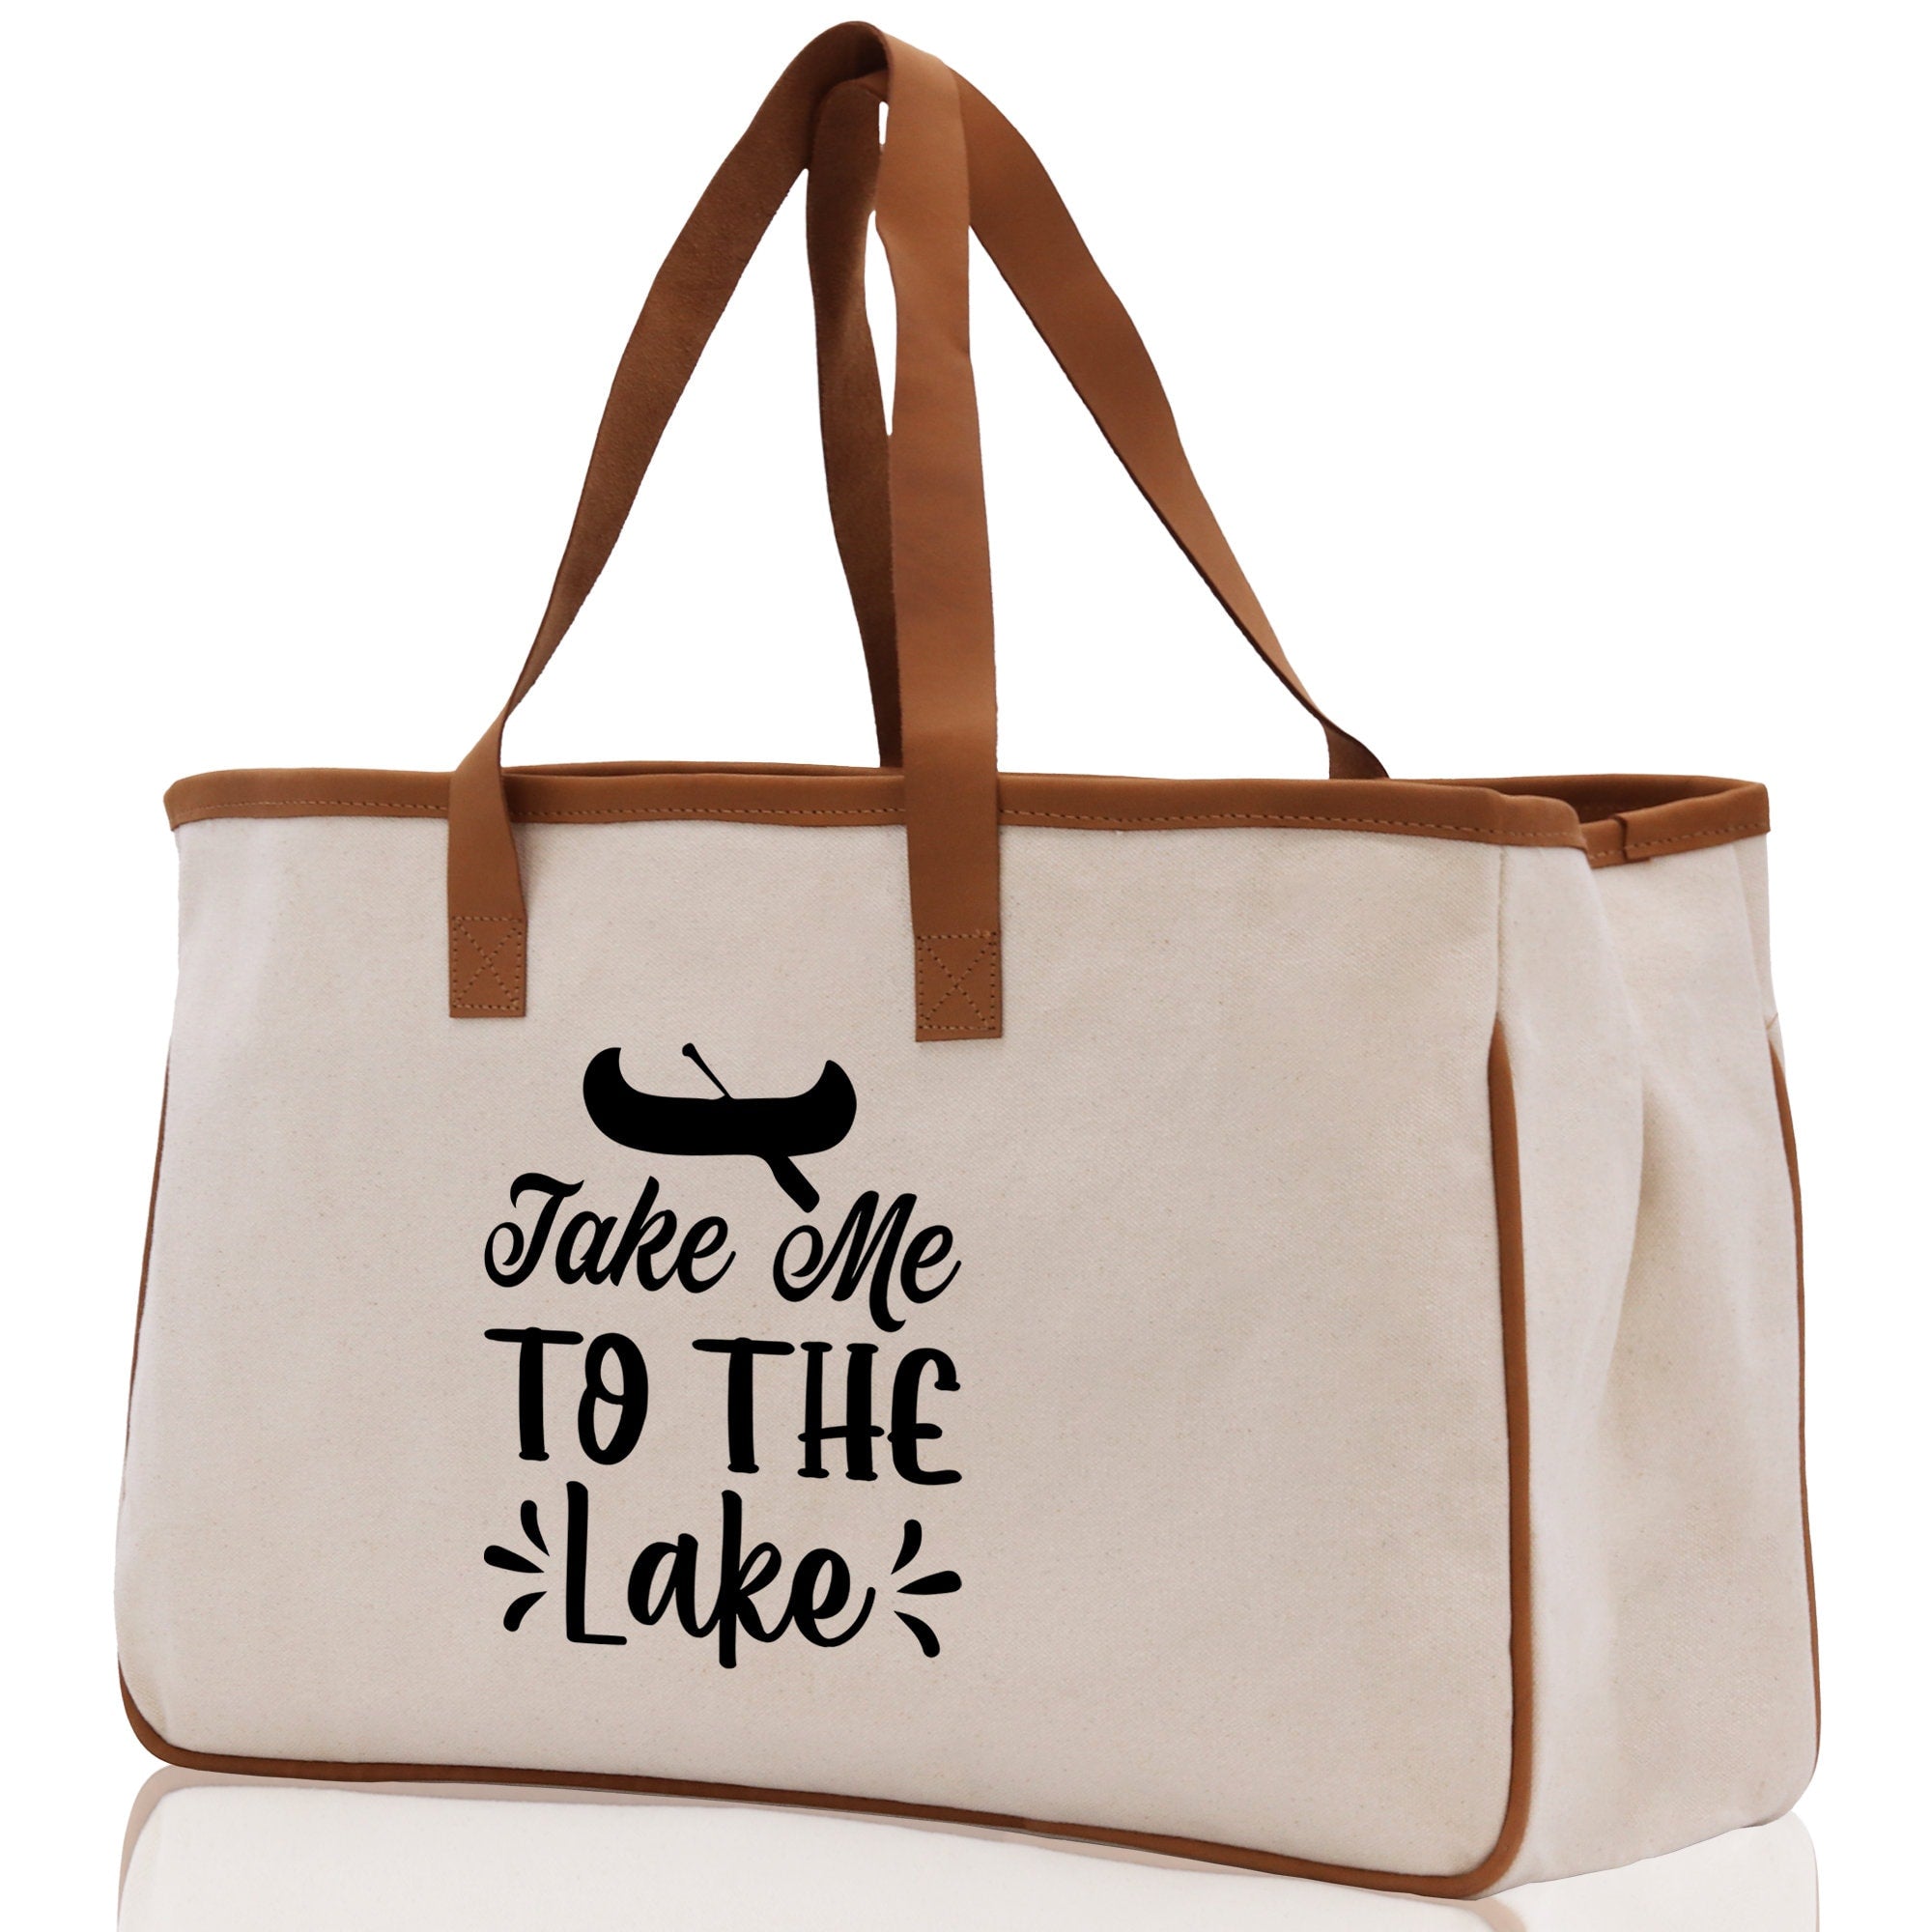 Take Me to the Lake Cotton Canvas Chic Tote Bag Camping Tote  Lake Lover Gift Tote Bag Outdoor Tote Weekender Tote Laker Tote